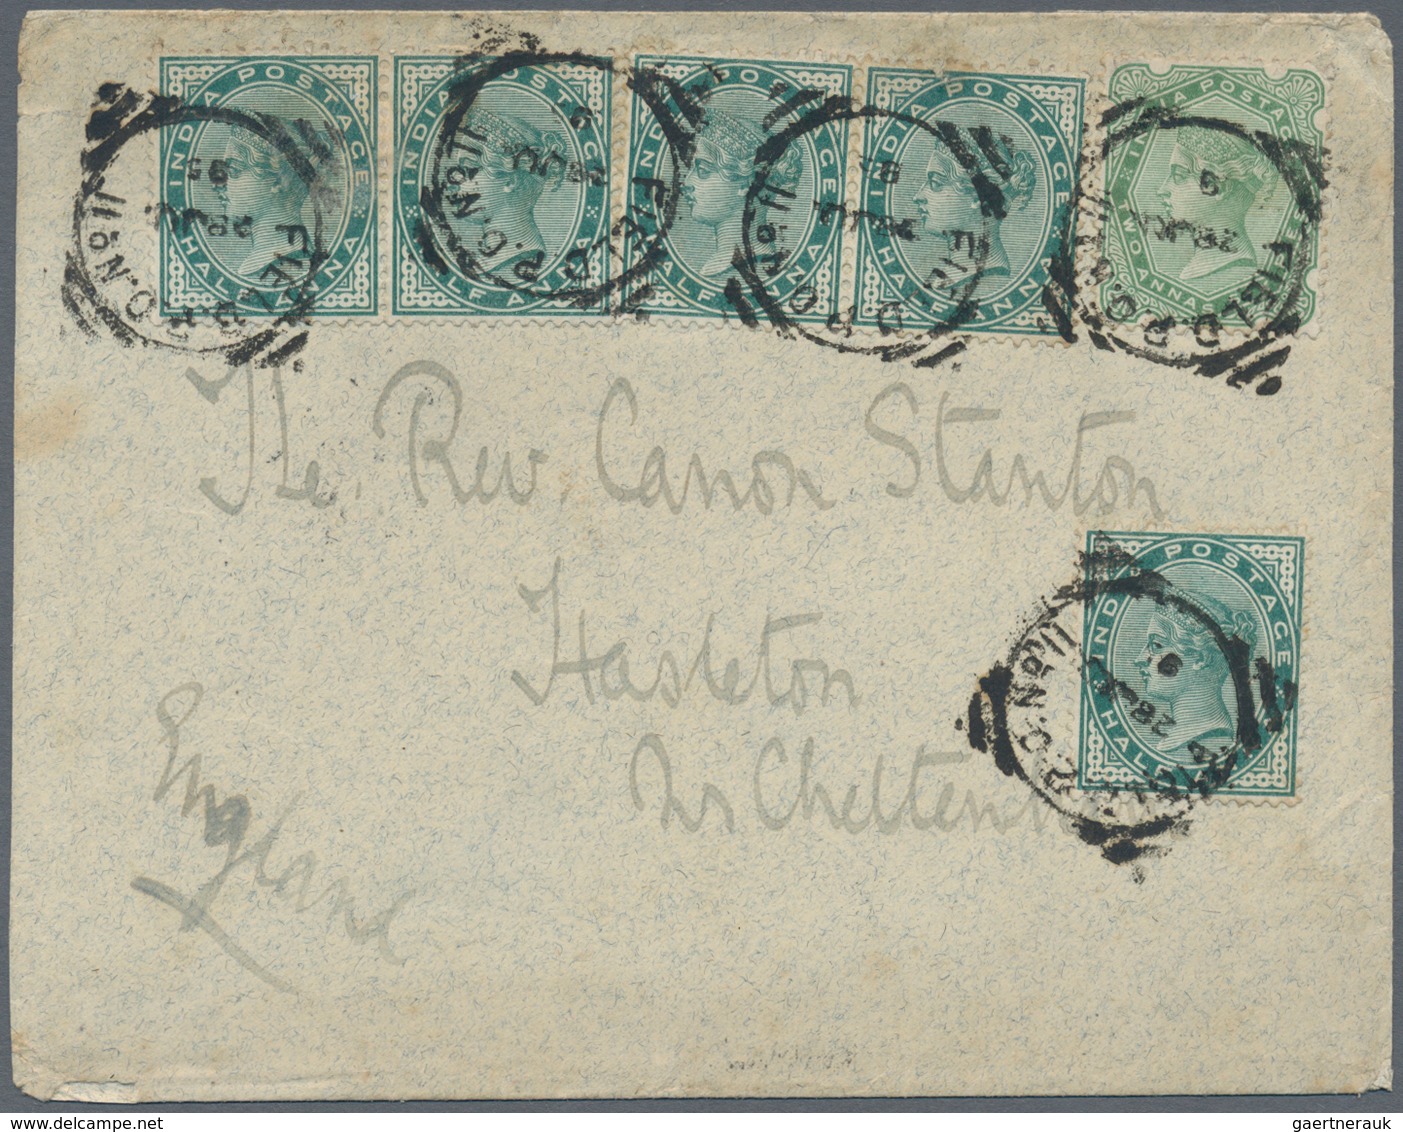 Indien - Feldpost: 1895 Chitral Relief Force: Double-rate Cover From Field Post Office 11 At Chakdar - Militärpostmarken